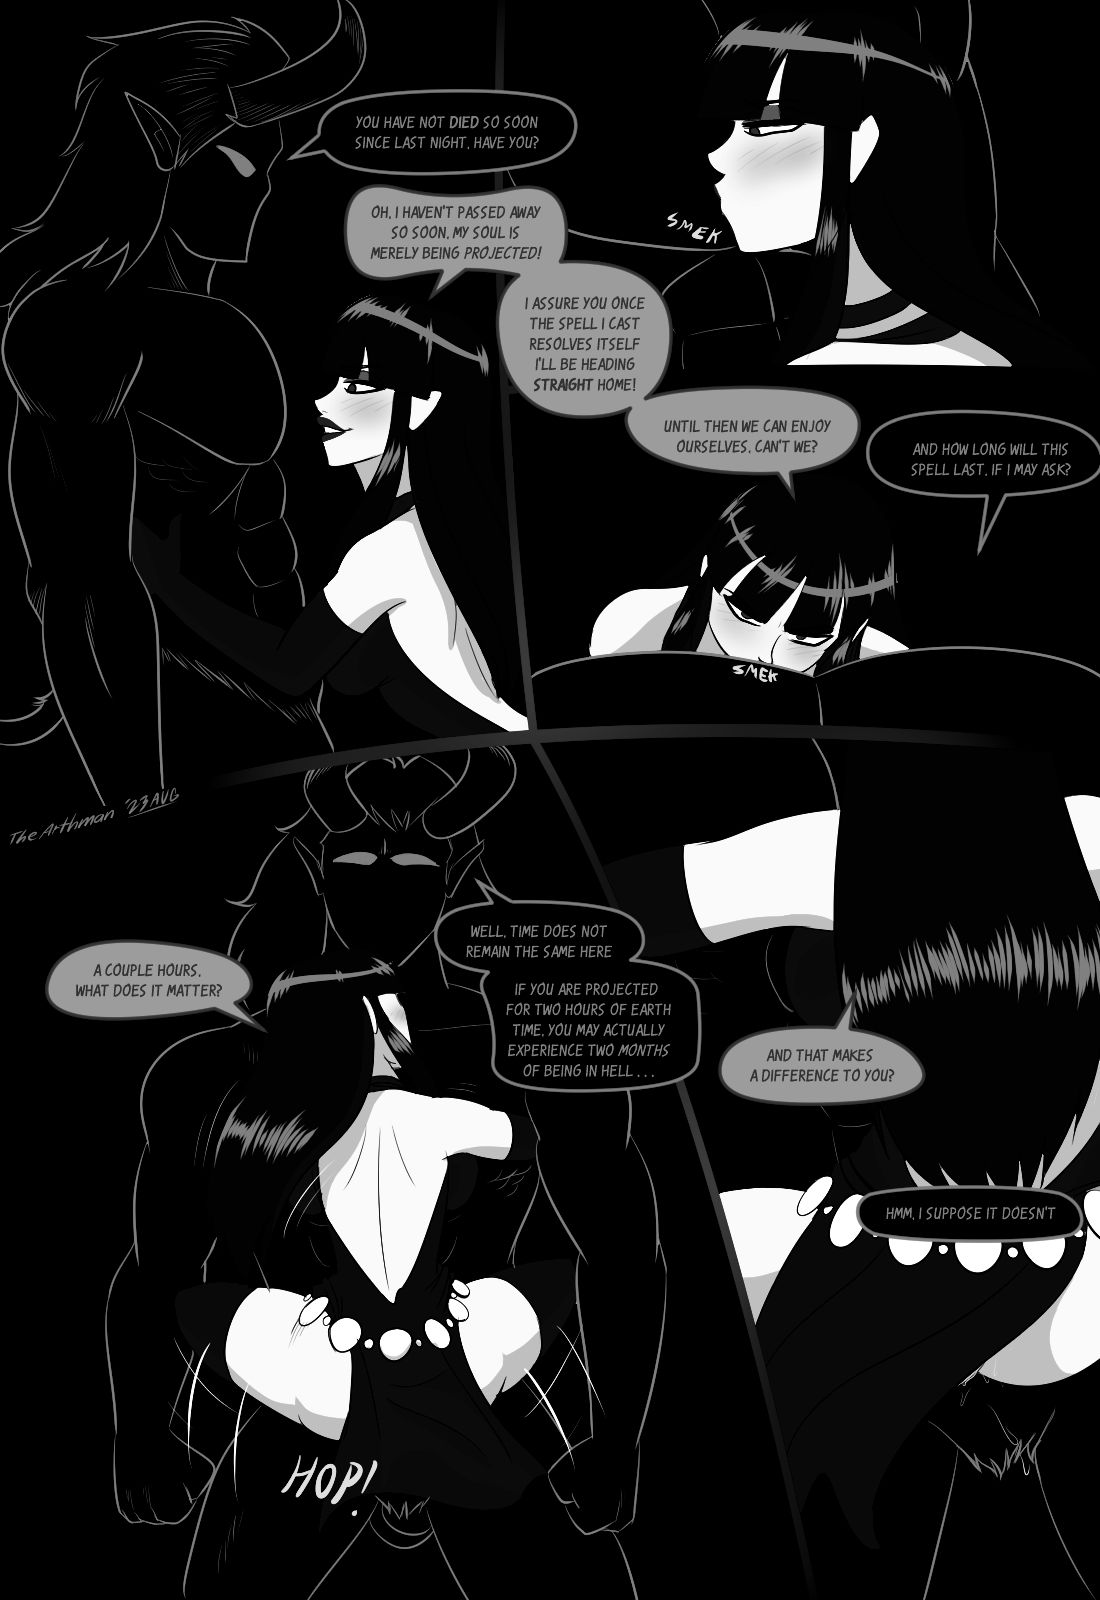 Dirtwater - Chapter 7 - Path of Sin Porn Comic english 22